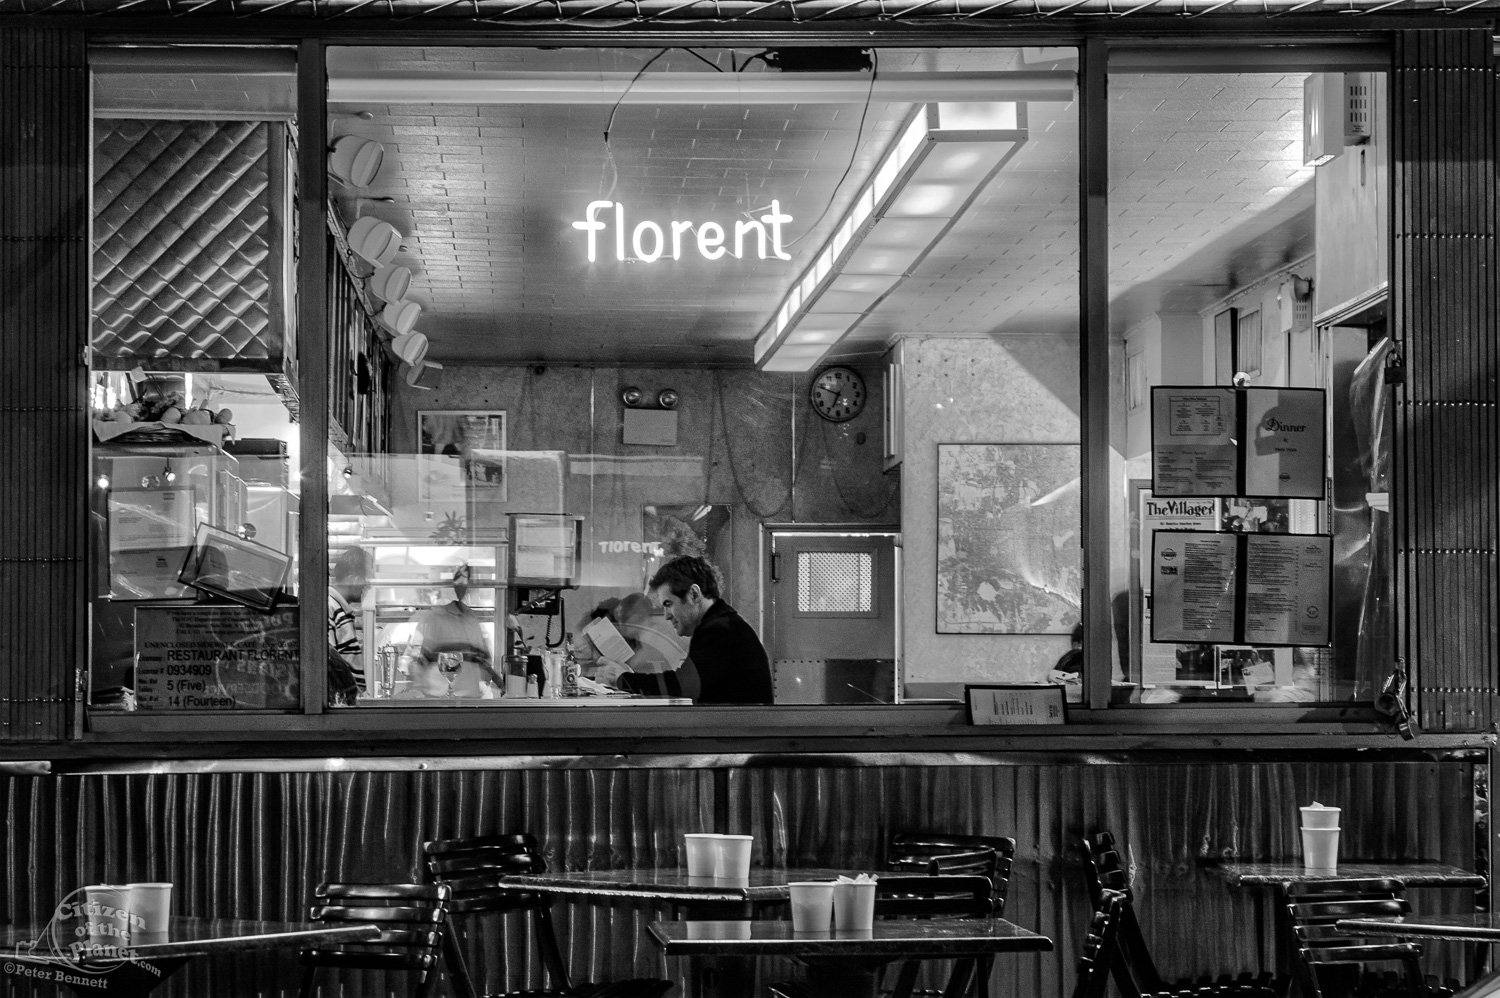 Late night at Florent, 1997